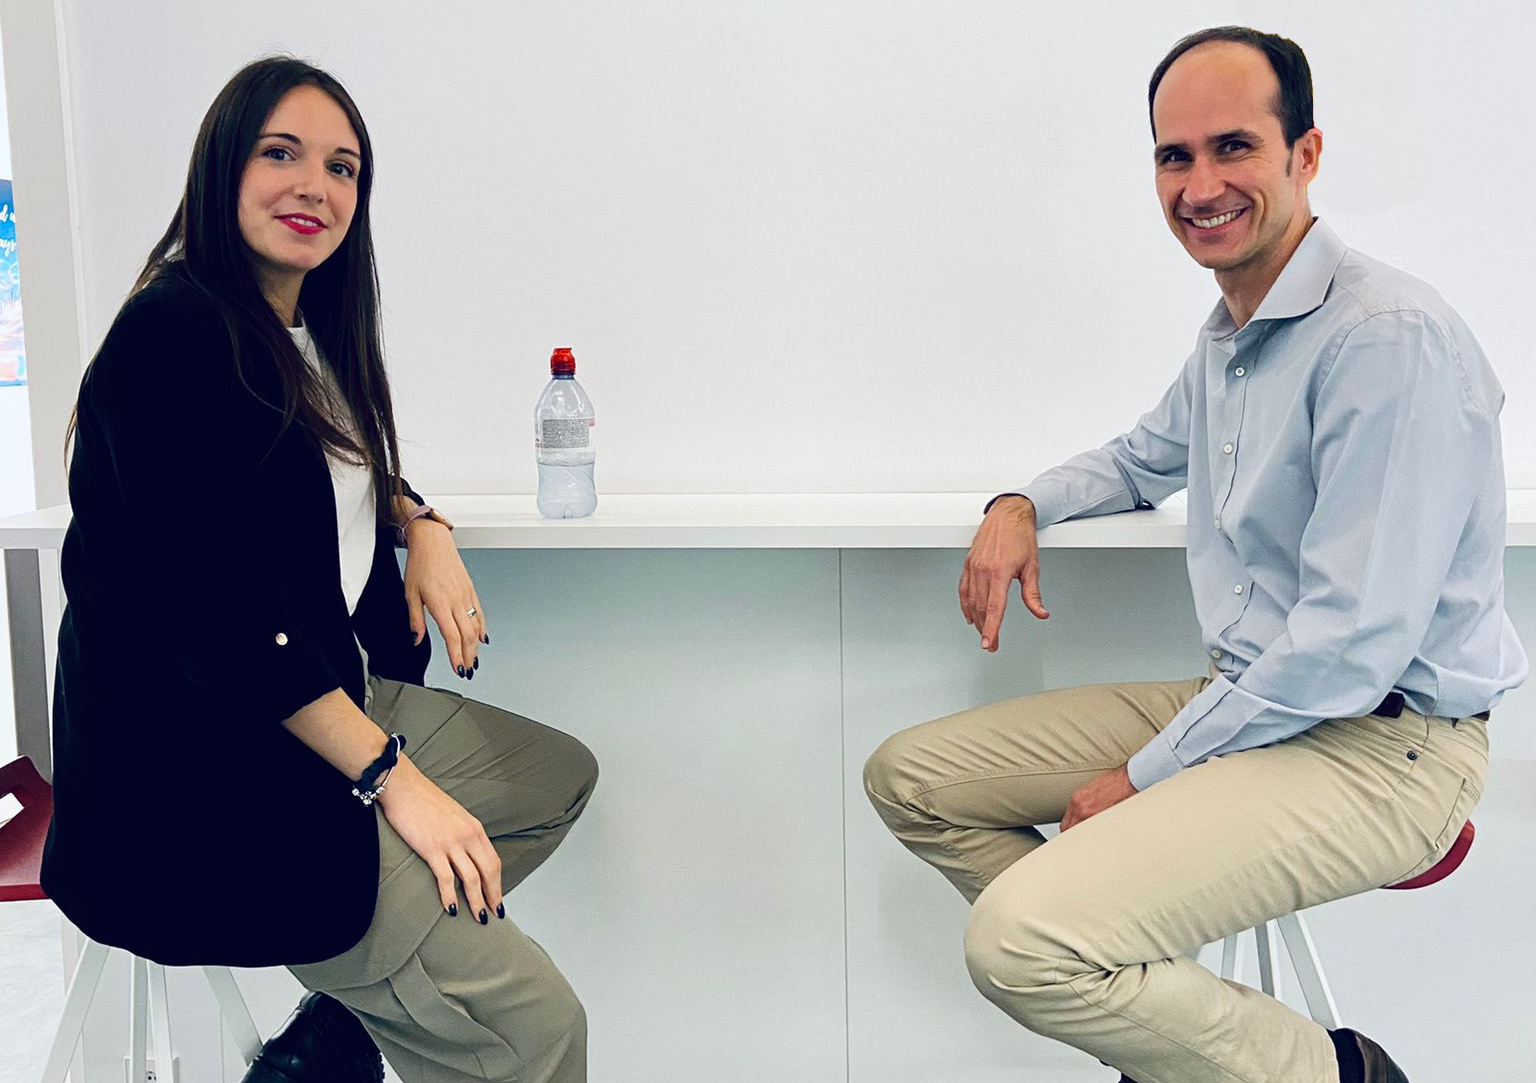 Interview with Natalia Salvia and Javier Martínez, employment consultants and payroll specialists